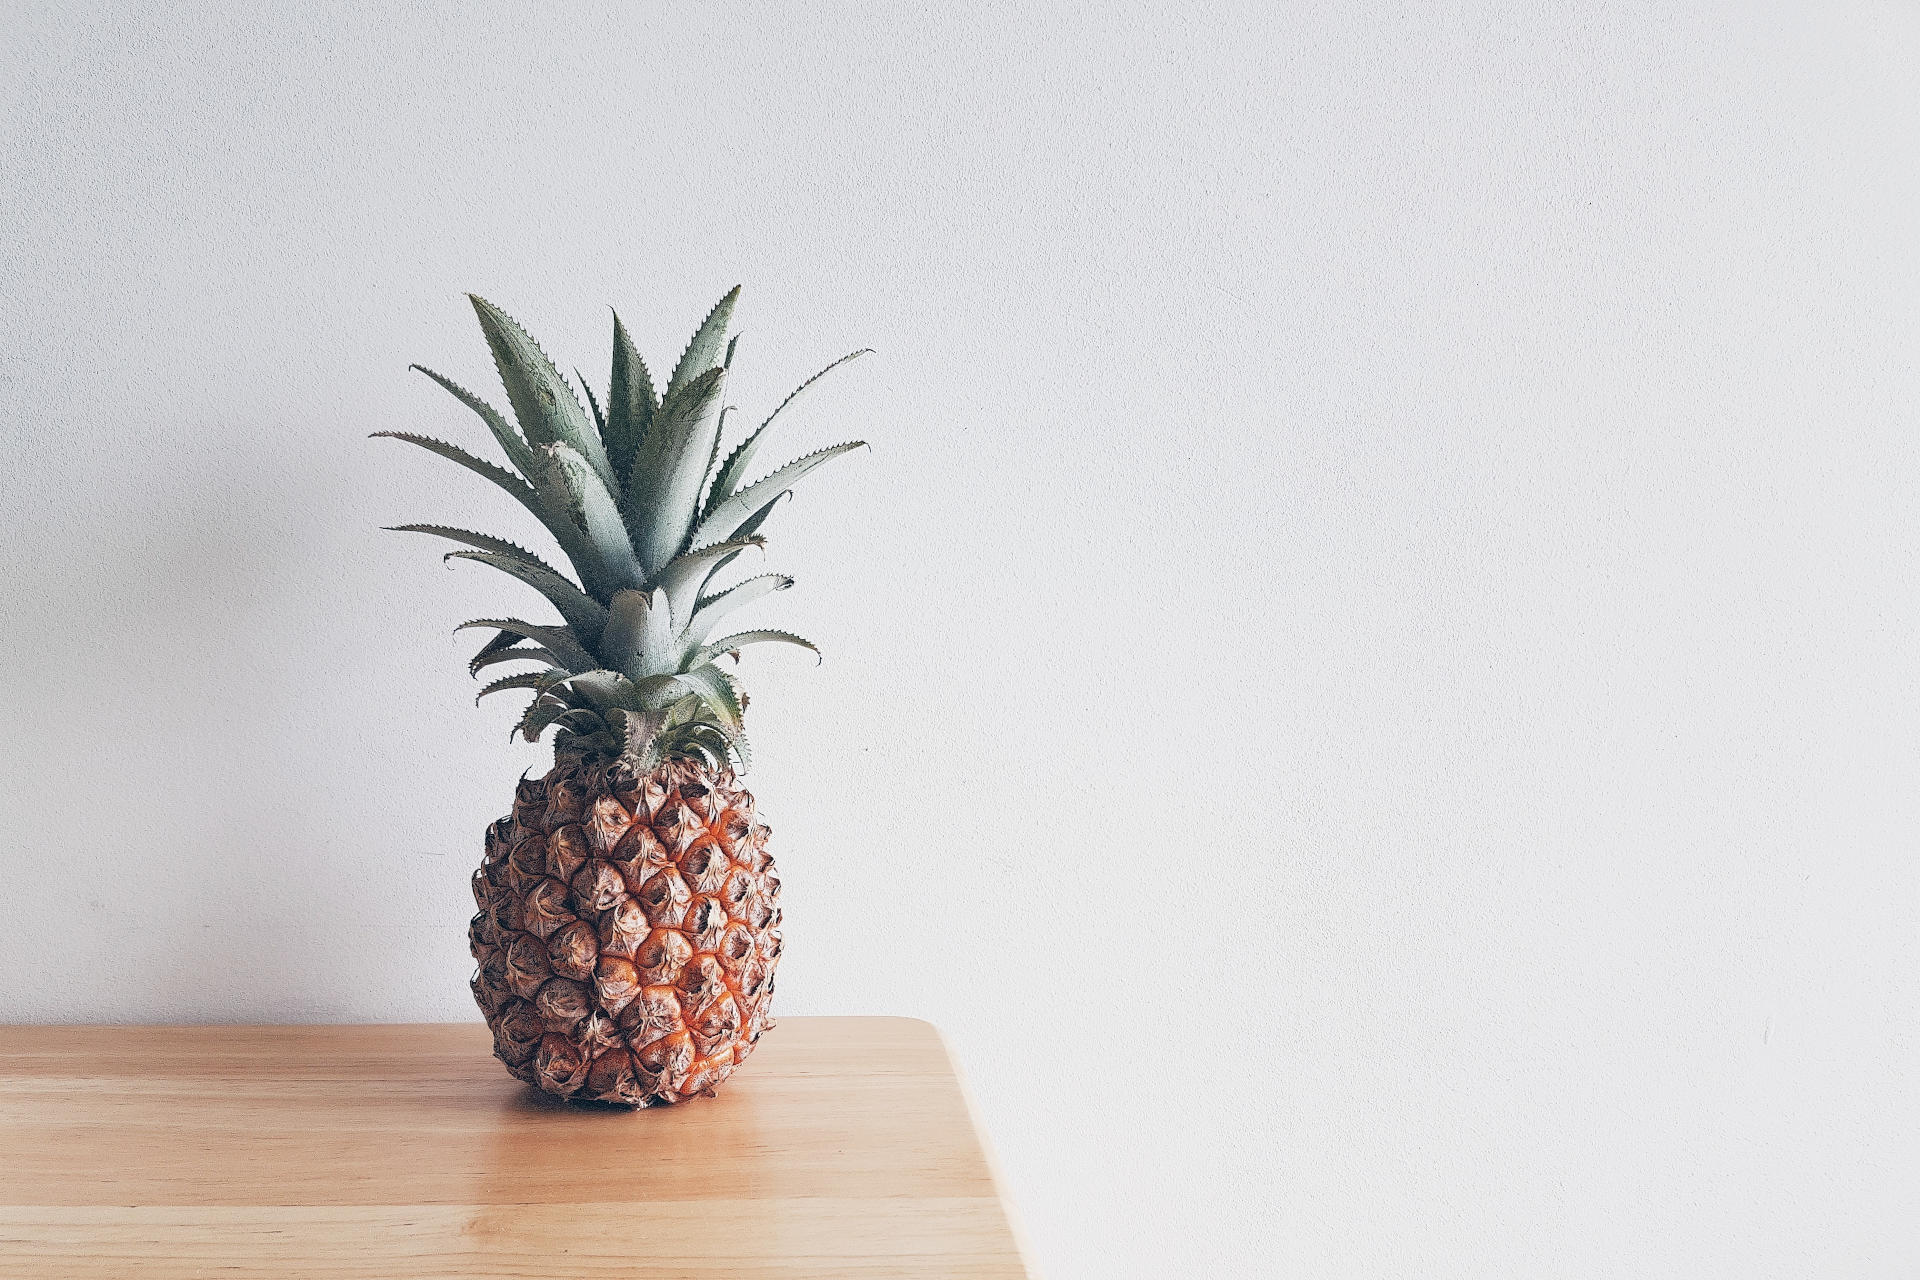 Pineapple on a beige wooden table